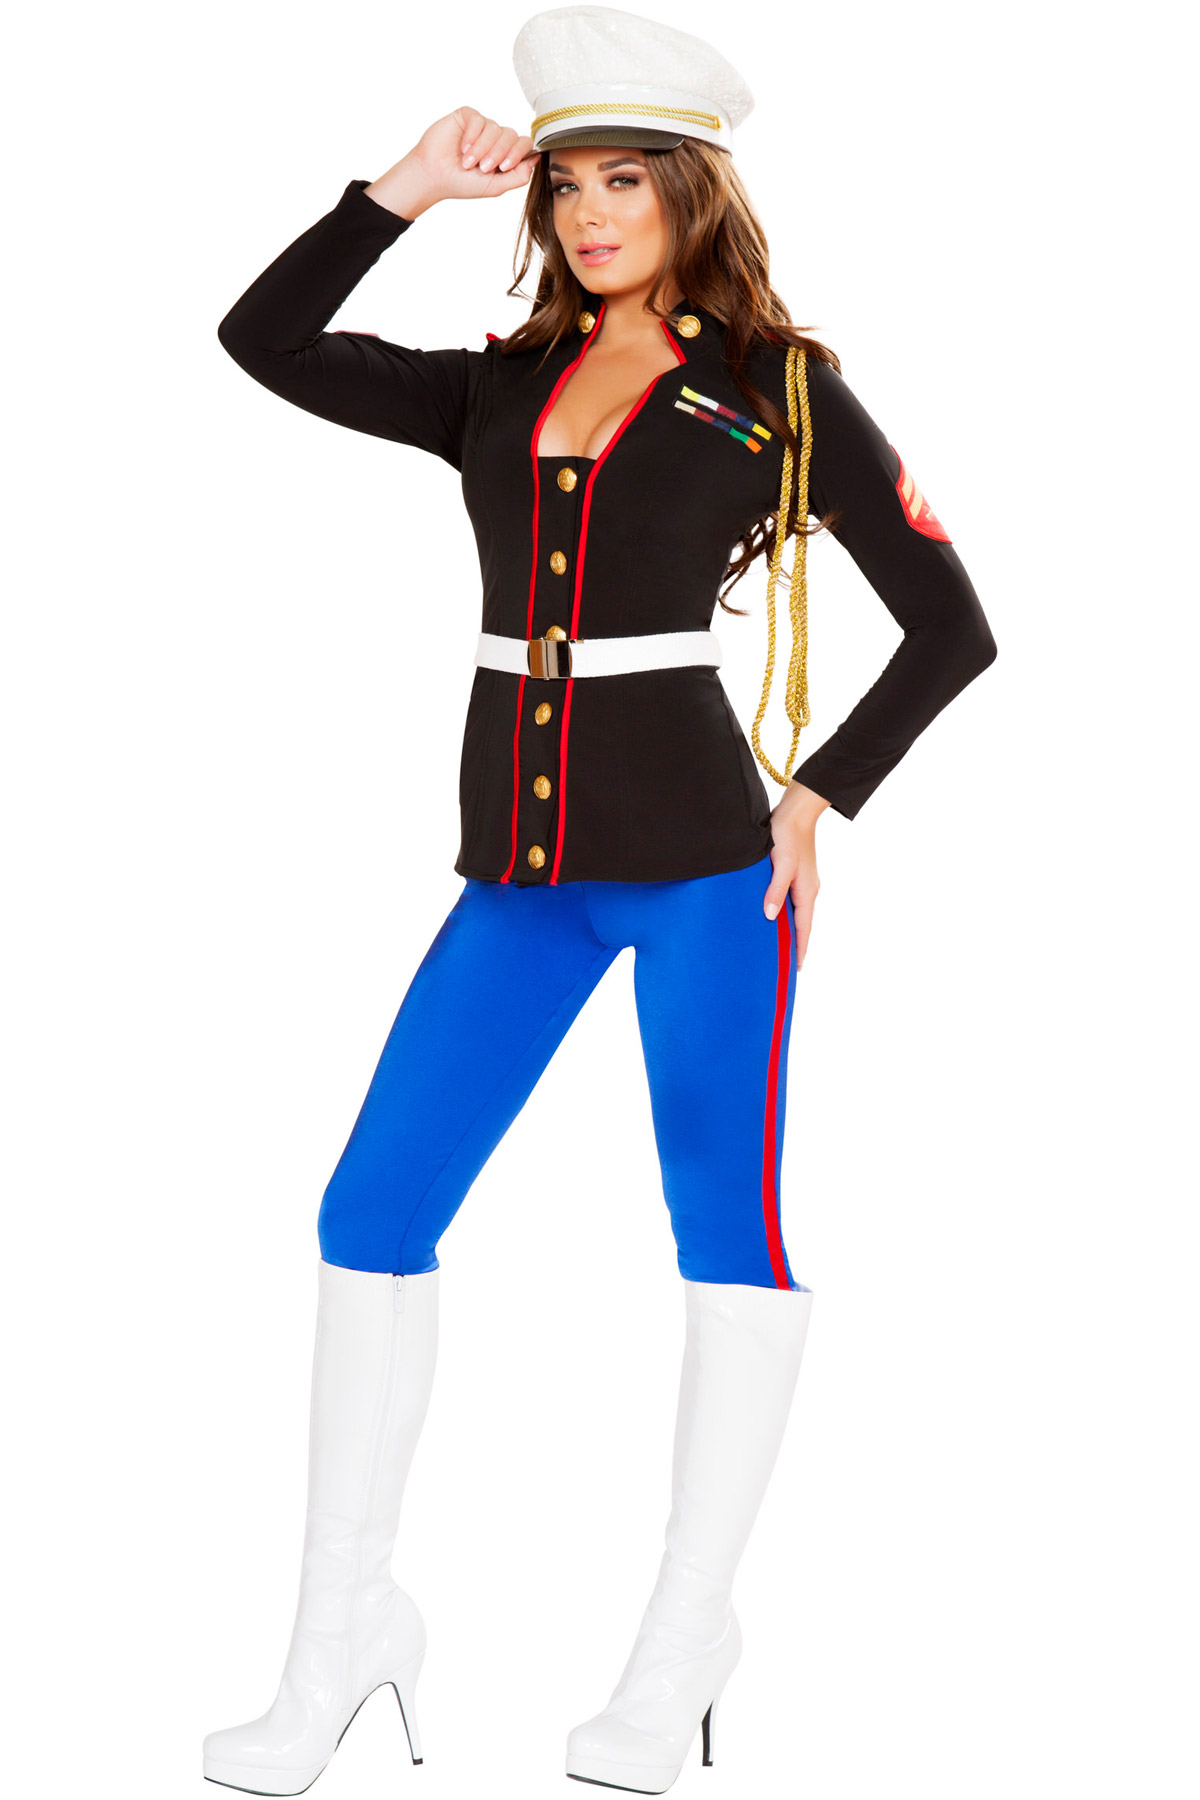 thumbnail 2 - Sexy Marine Corporal Adult Women Military Costume Braded Aiguillette Jacket Pant